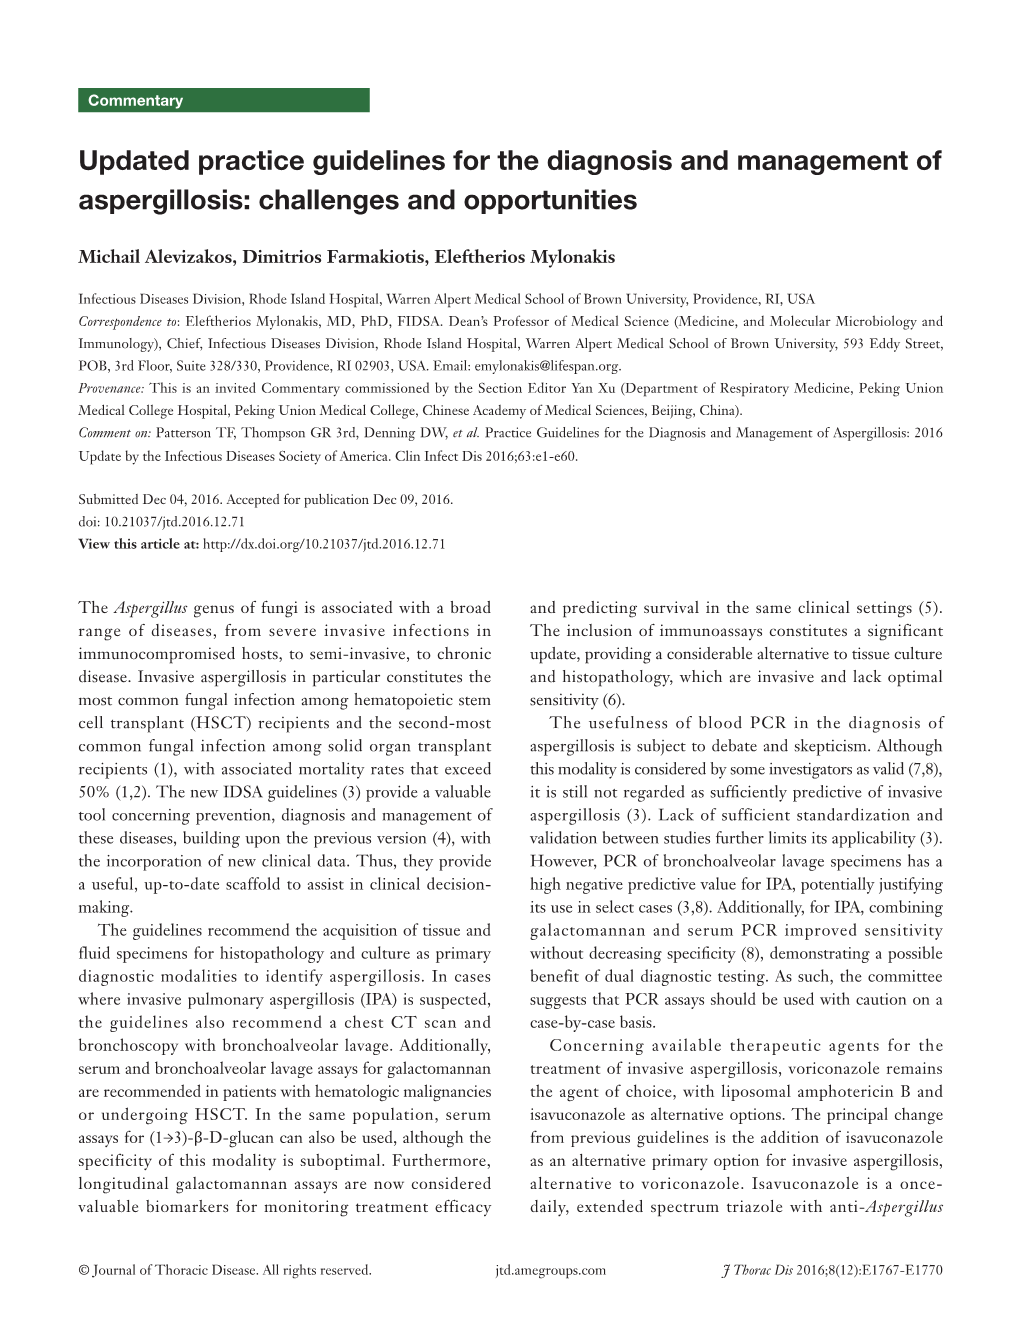 Updated Practice Guidelines for the Diagnosis and Management of Aspergillosis: Challenges and Opportunities